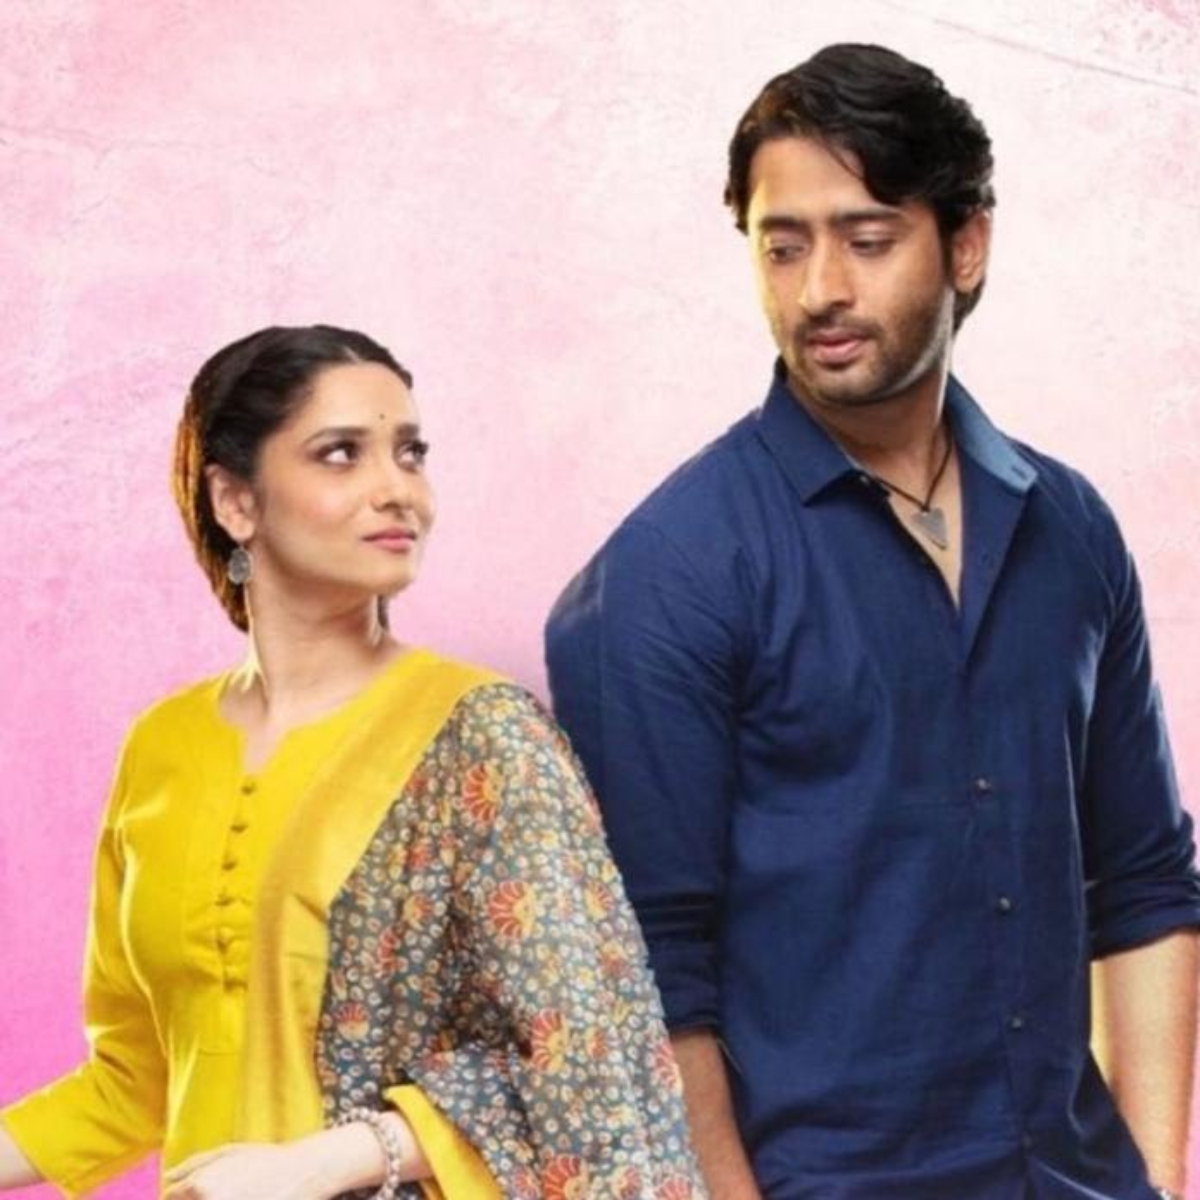 Pavitra Rishta 2 Review: Everything is same yet different in this Ankita Lokhande, Shaheer Sheikh starrer